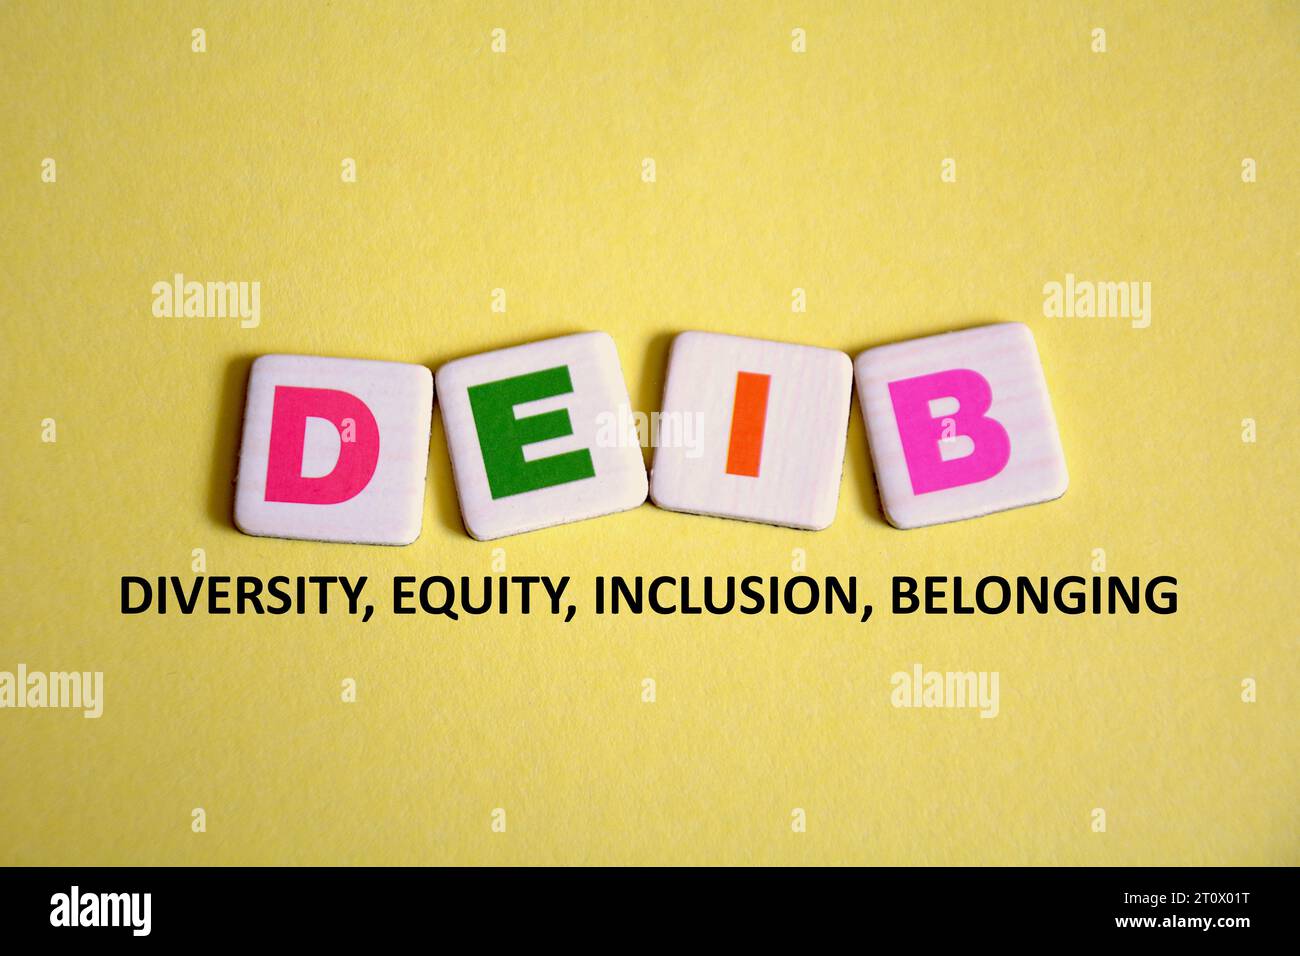 DEIB Colorful Letters on Tiles and Words: Diversity, Equity, Inclusion, and Belonging on Yellow Background. Business Concept of DEIB. Stock Photo